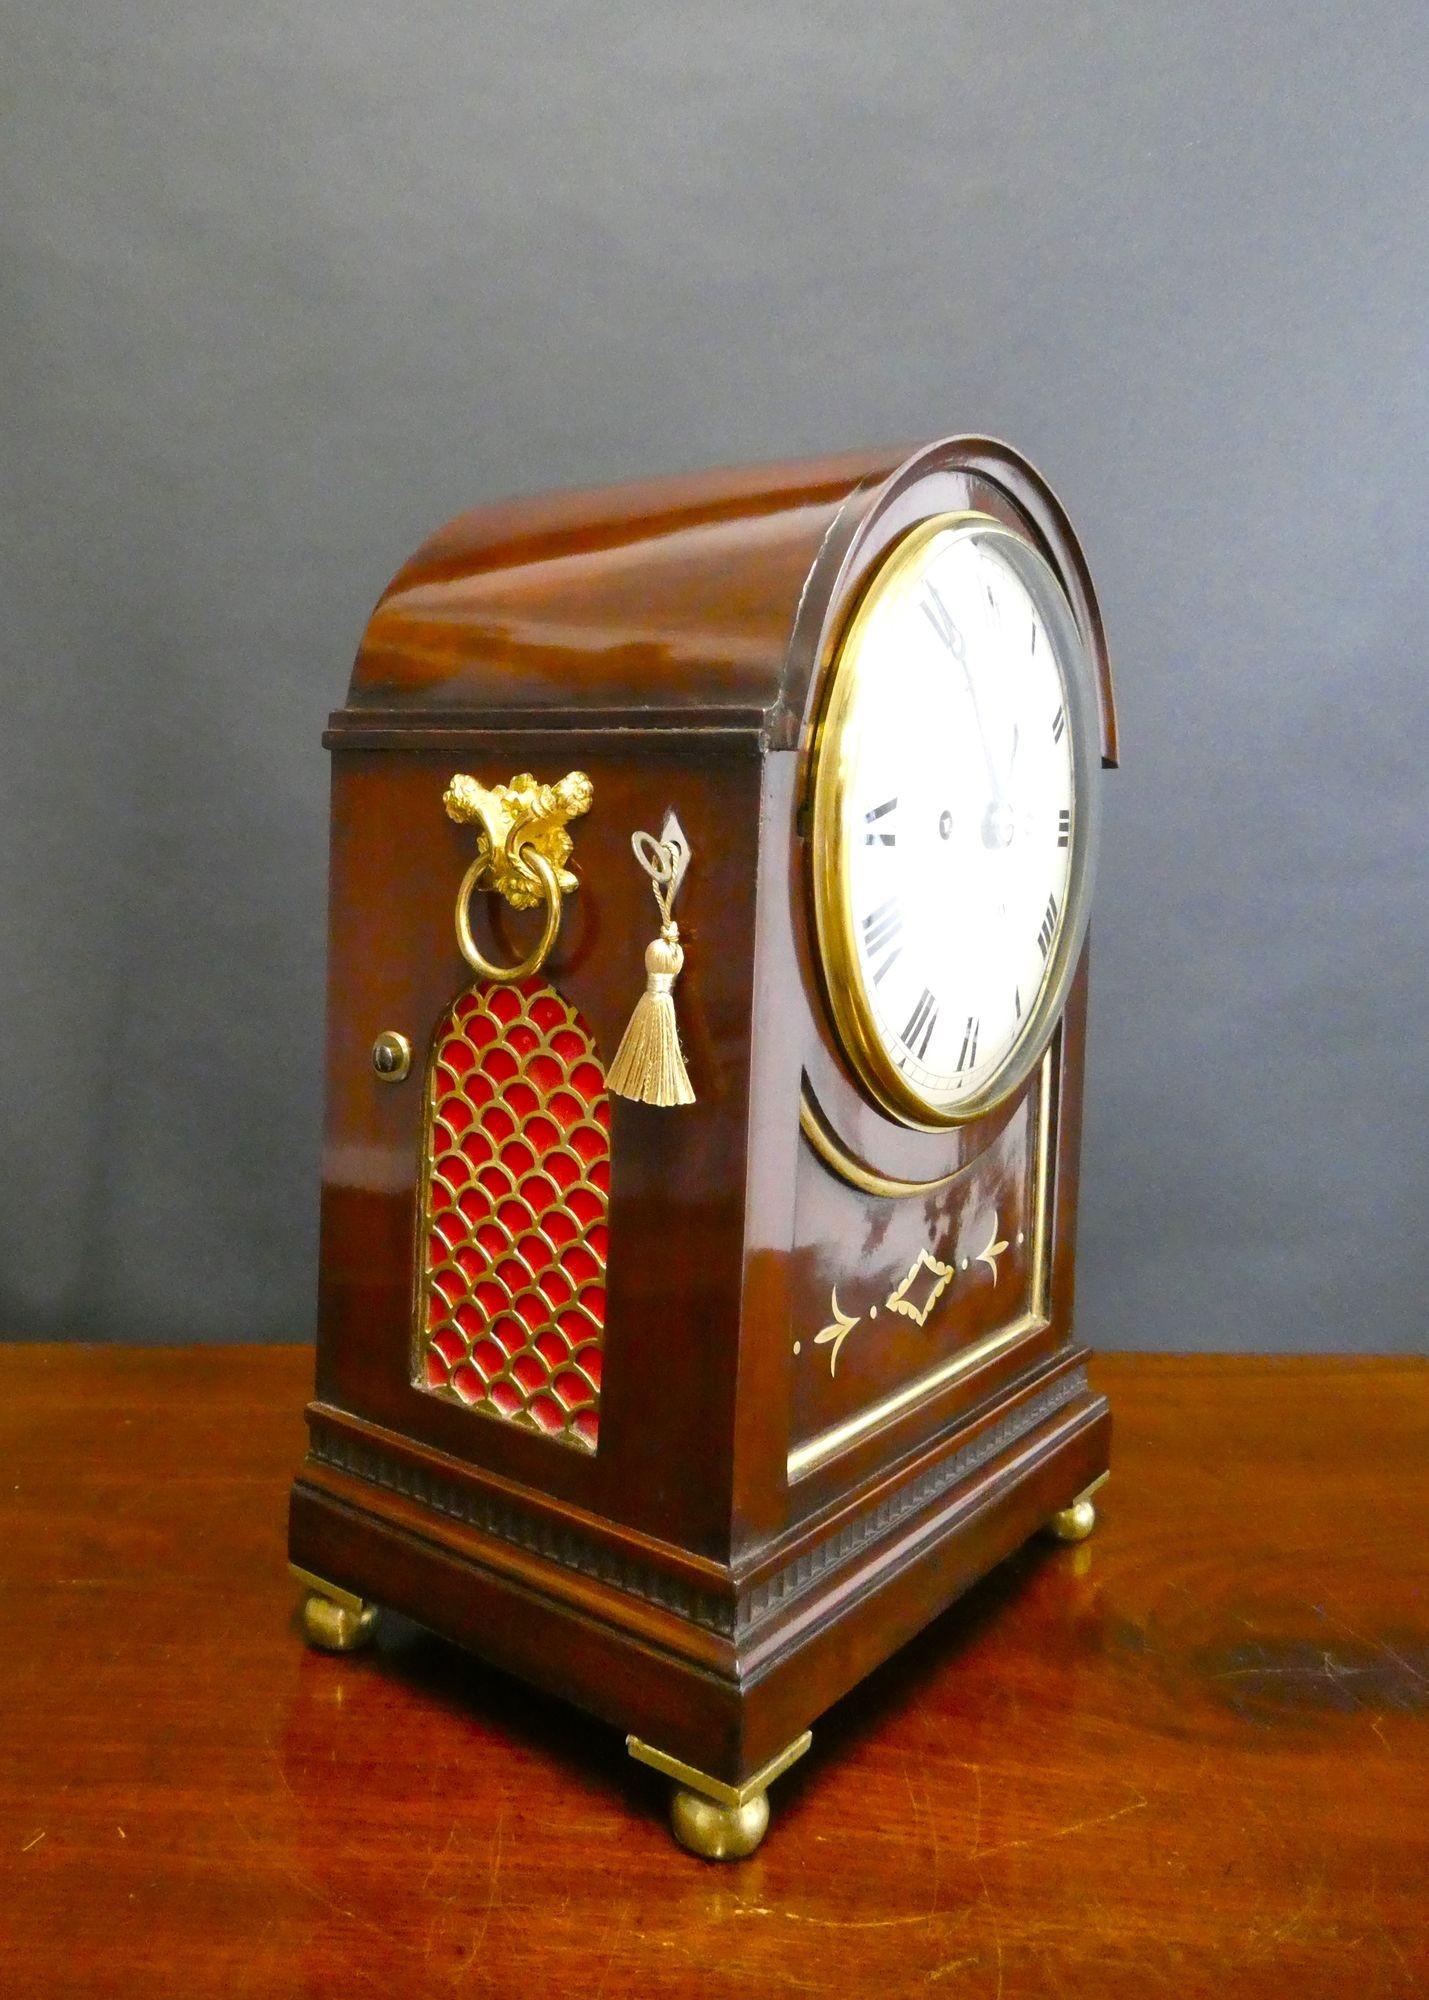 Edwardian Double Fusee Bracket Clock, Dent, London

Edwardian bracket clock housed in a mahogany arch top case with inset front panel banded in brass with brass inlay, stepped plinth with dentil moulding decoration resting on four brass ball feet.